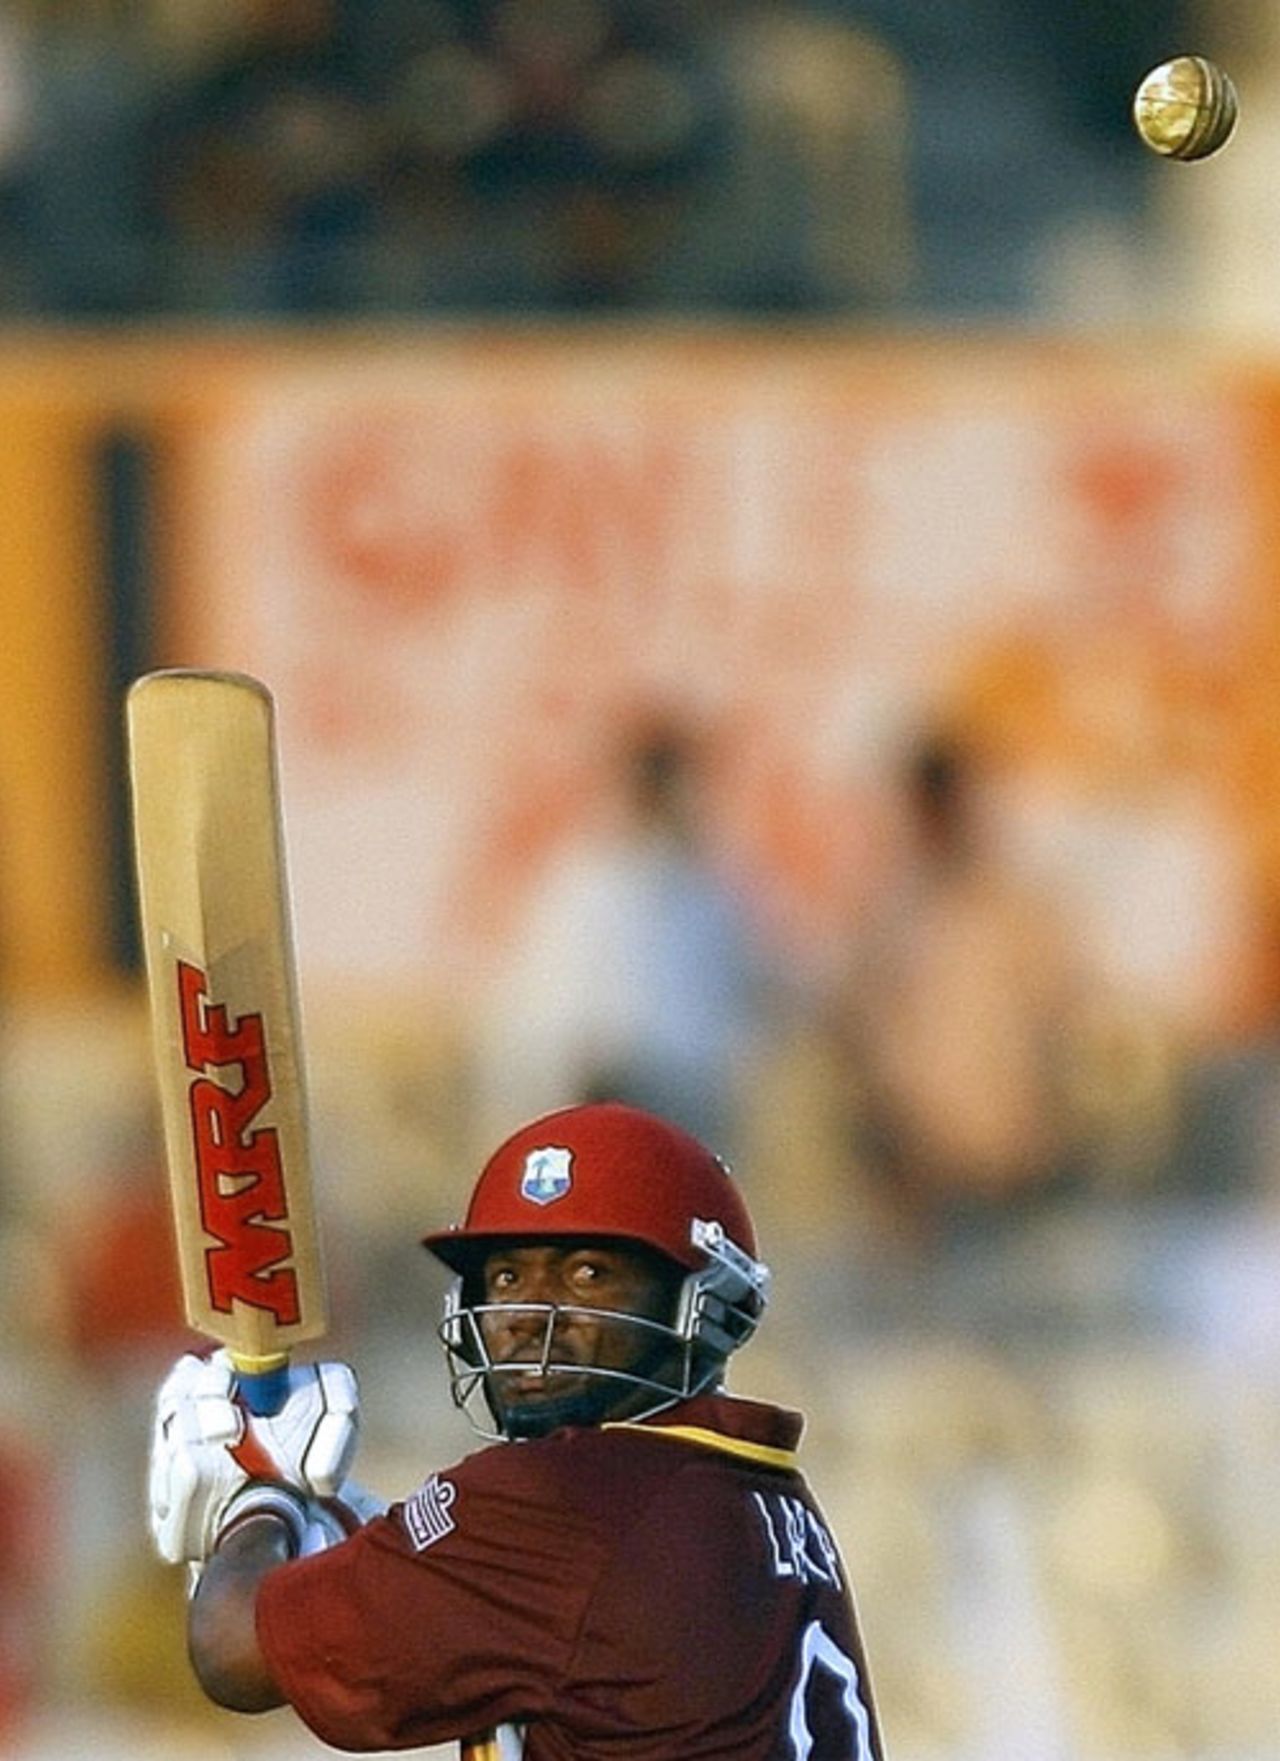 Brian Lara spoons one over the top, Australia v West Indies, 4th match, Mumbai, October 18, 2006